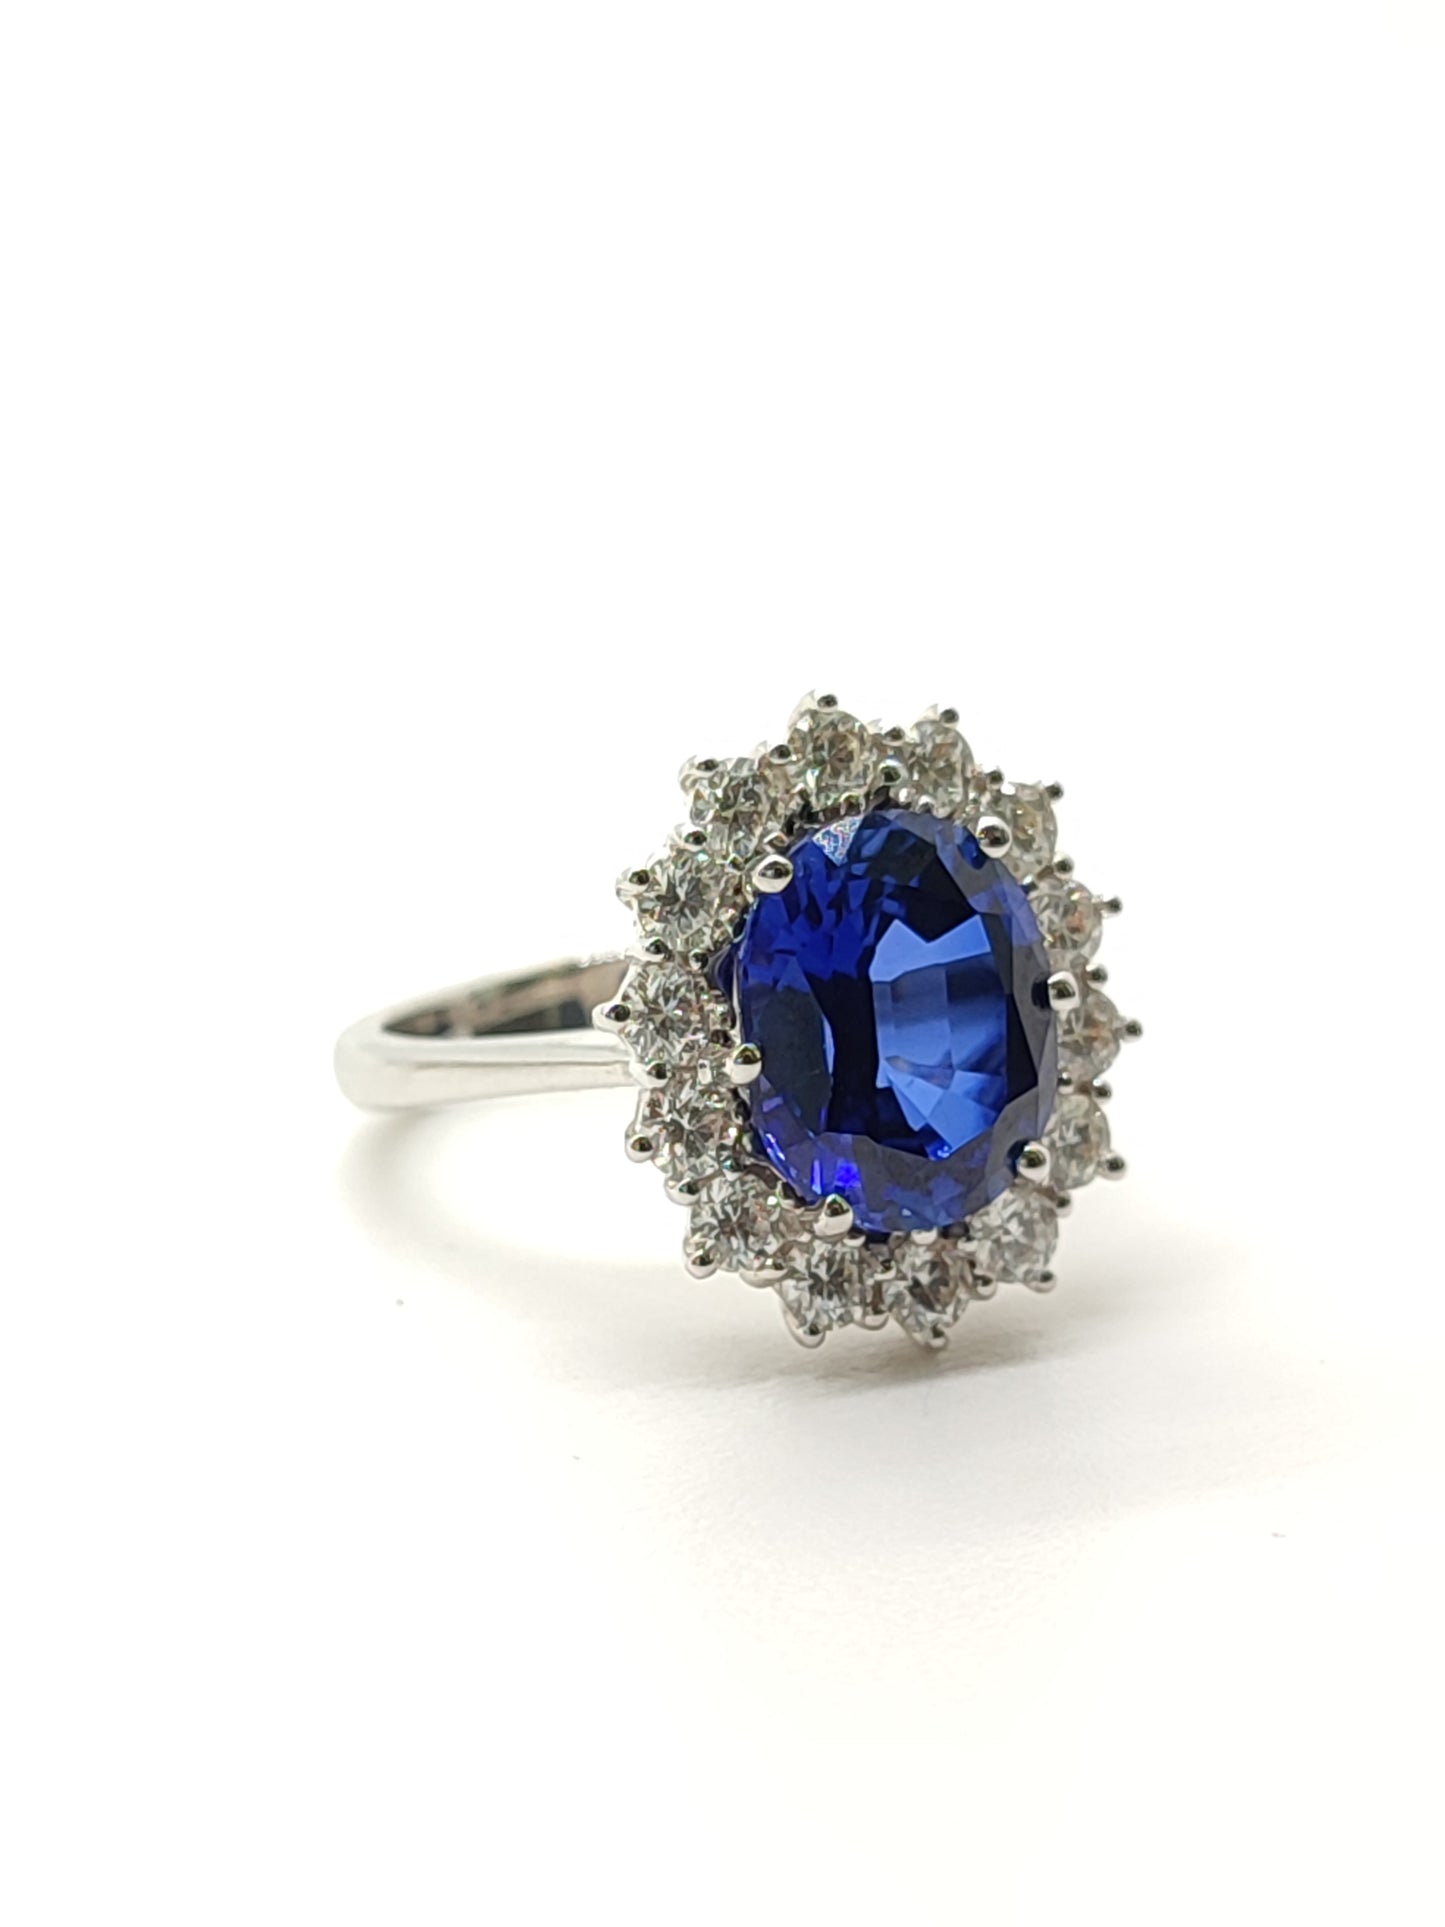 Gold solitaire ring with created sapphire and diamonds